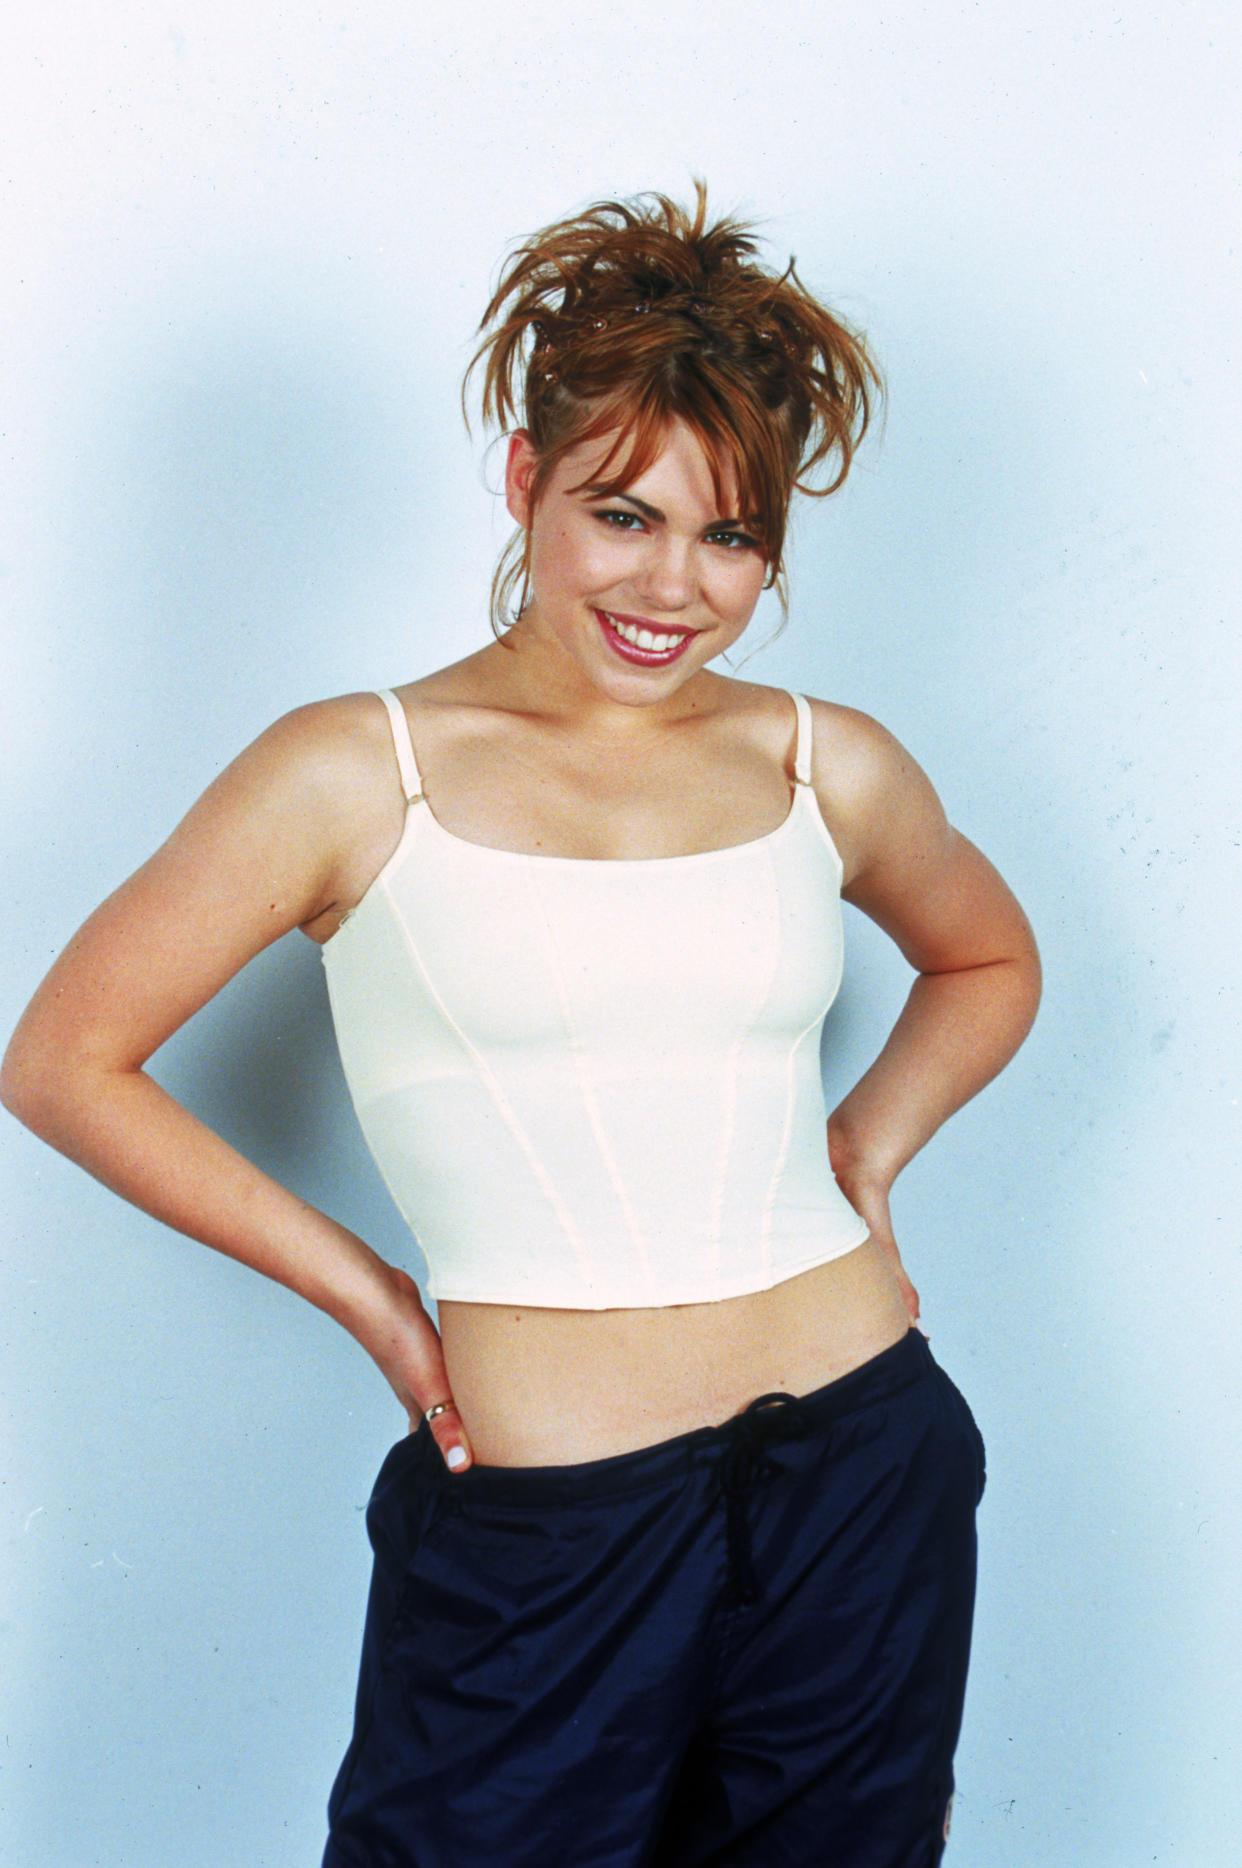 Teenage pop star Billie Piper, circa 1998. (Photo by Dave Hogan/Hulton Archive/Getty Images)